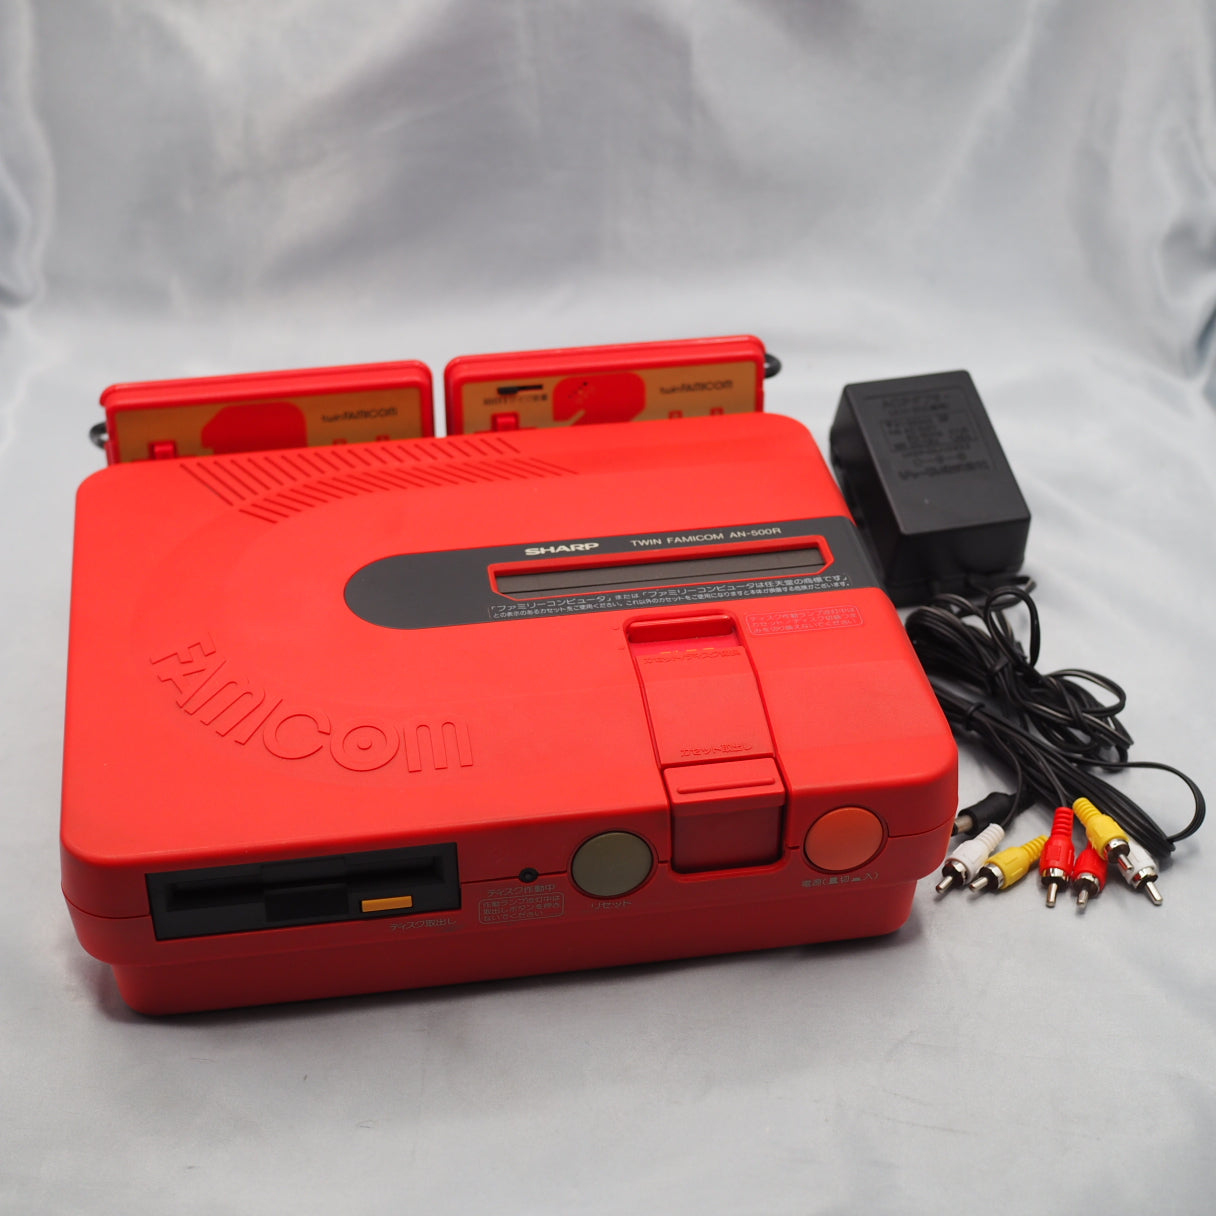 Famicom + Disk System + Twin Famicom SET [New Rubber Belt Replaced]